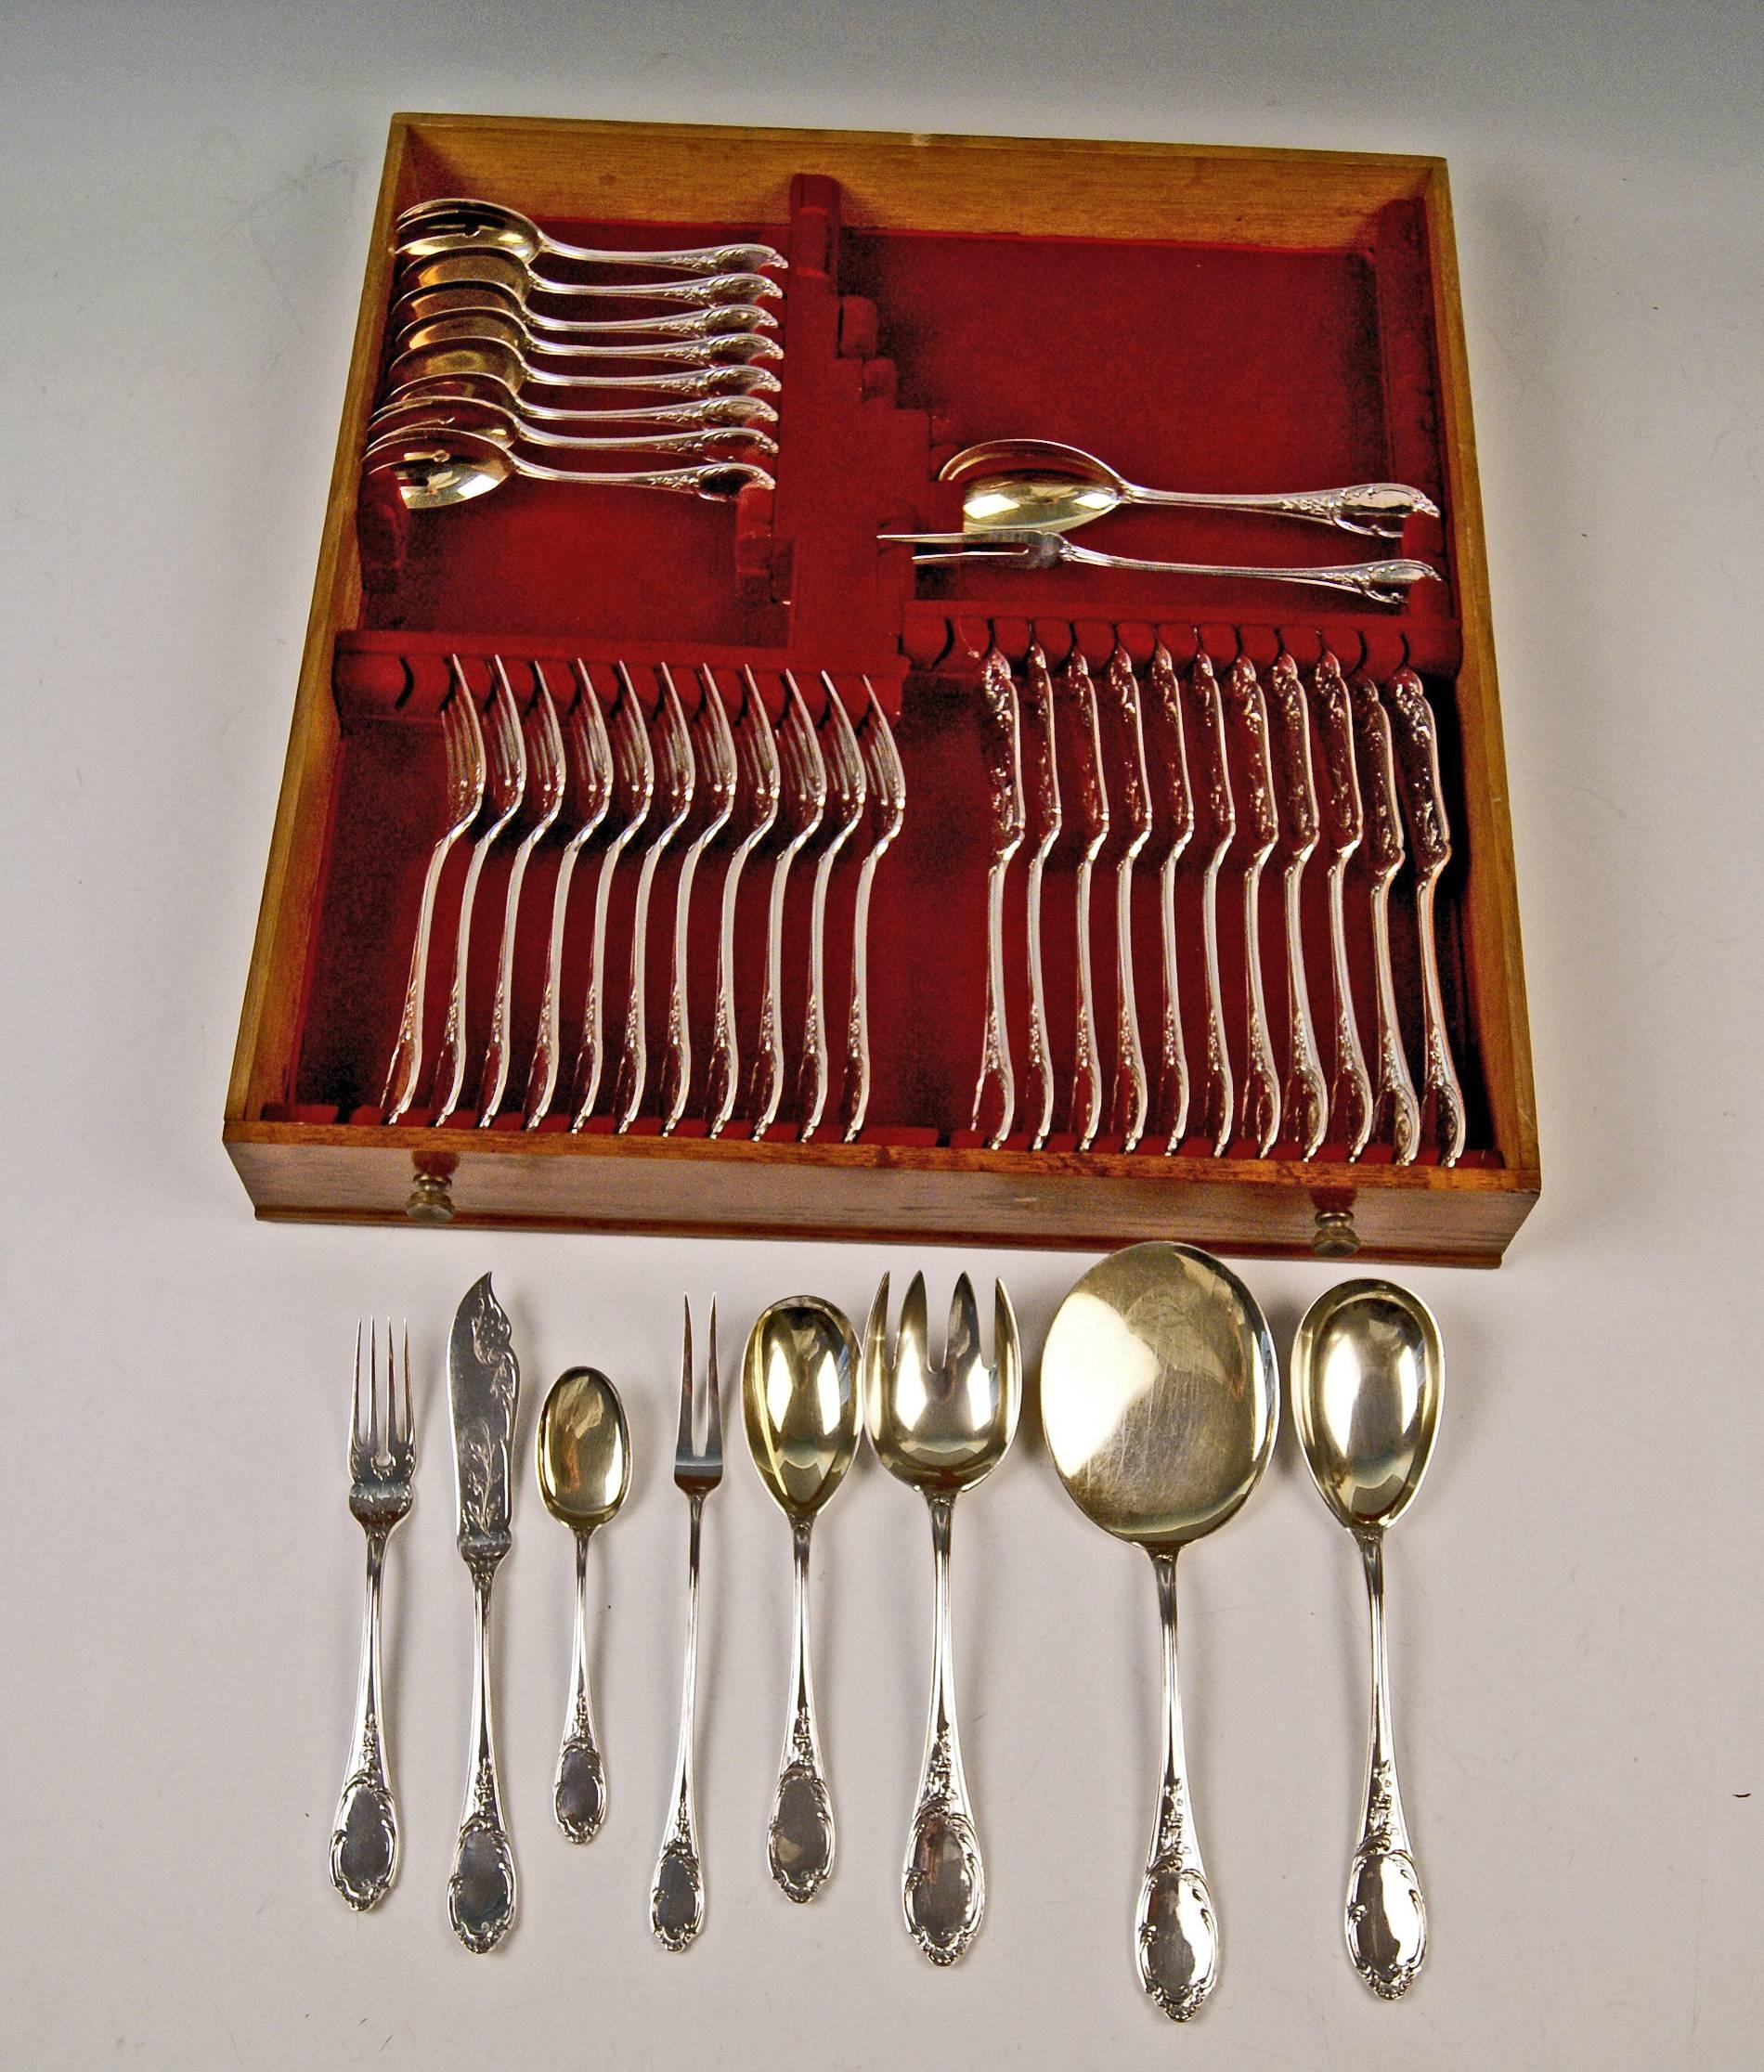 silverware made in germany